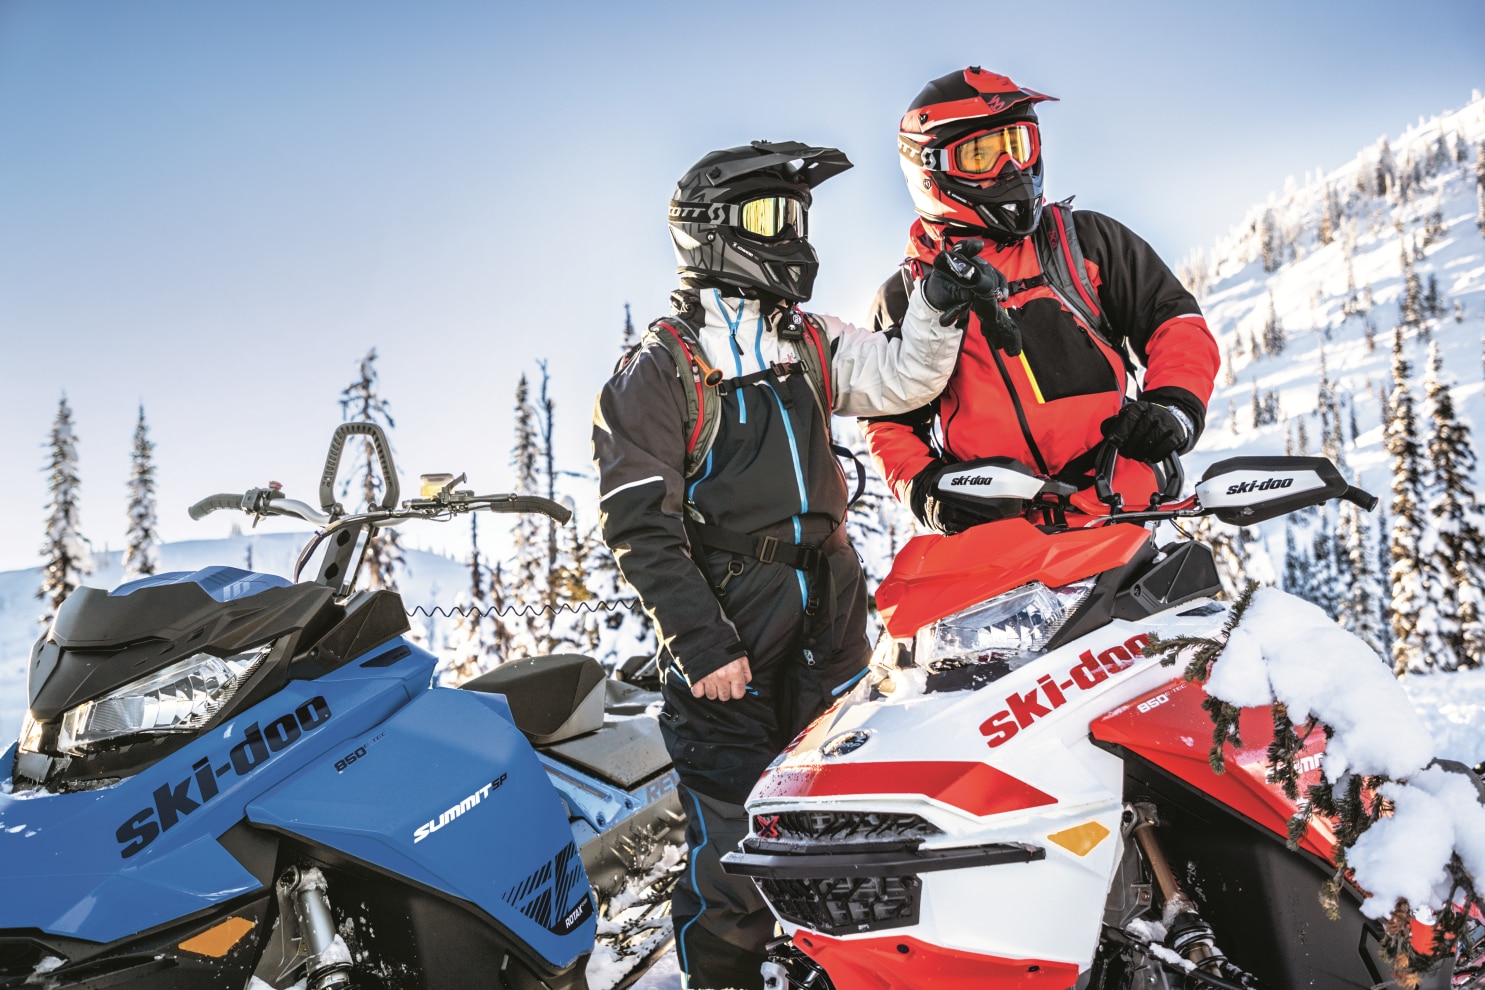 SKI-DOO MAINTAINS FOCUS ON CUTTING-EDGE INNOVATION AND WOWS THE CROWD AT CLUB BRP